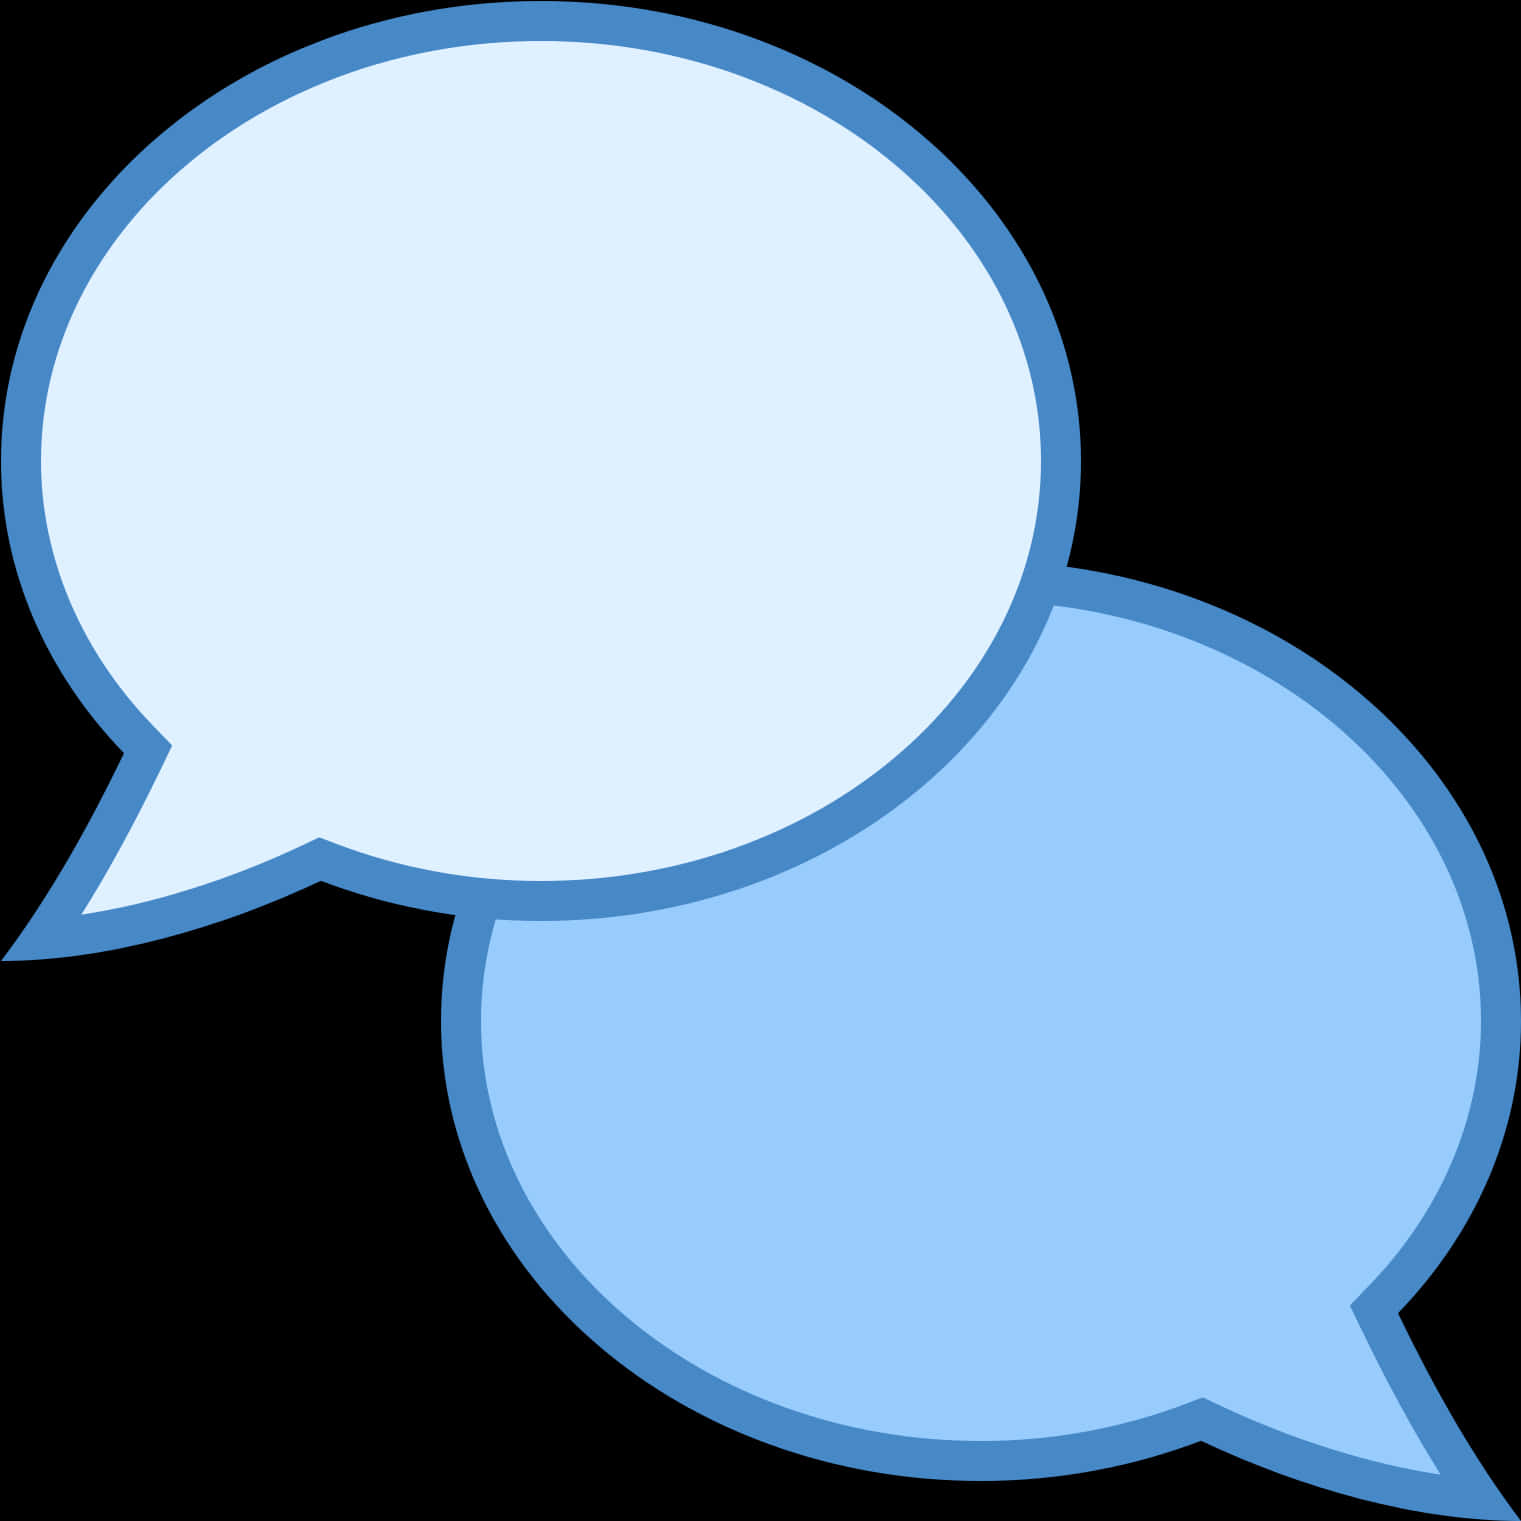 A Pair Of Blue And White Speech Bubbles